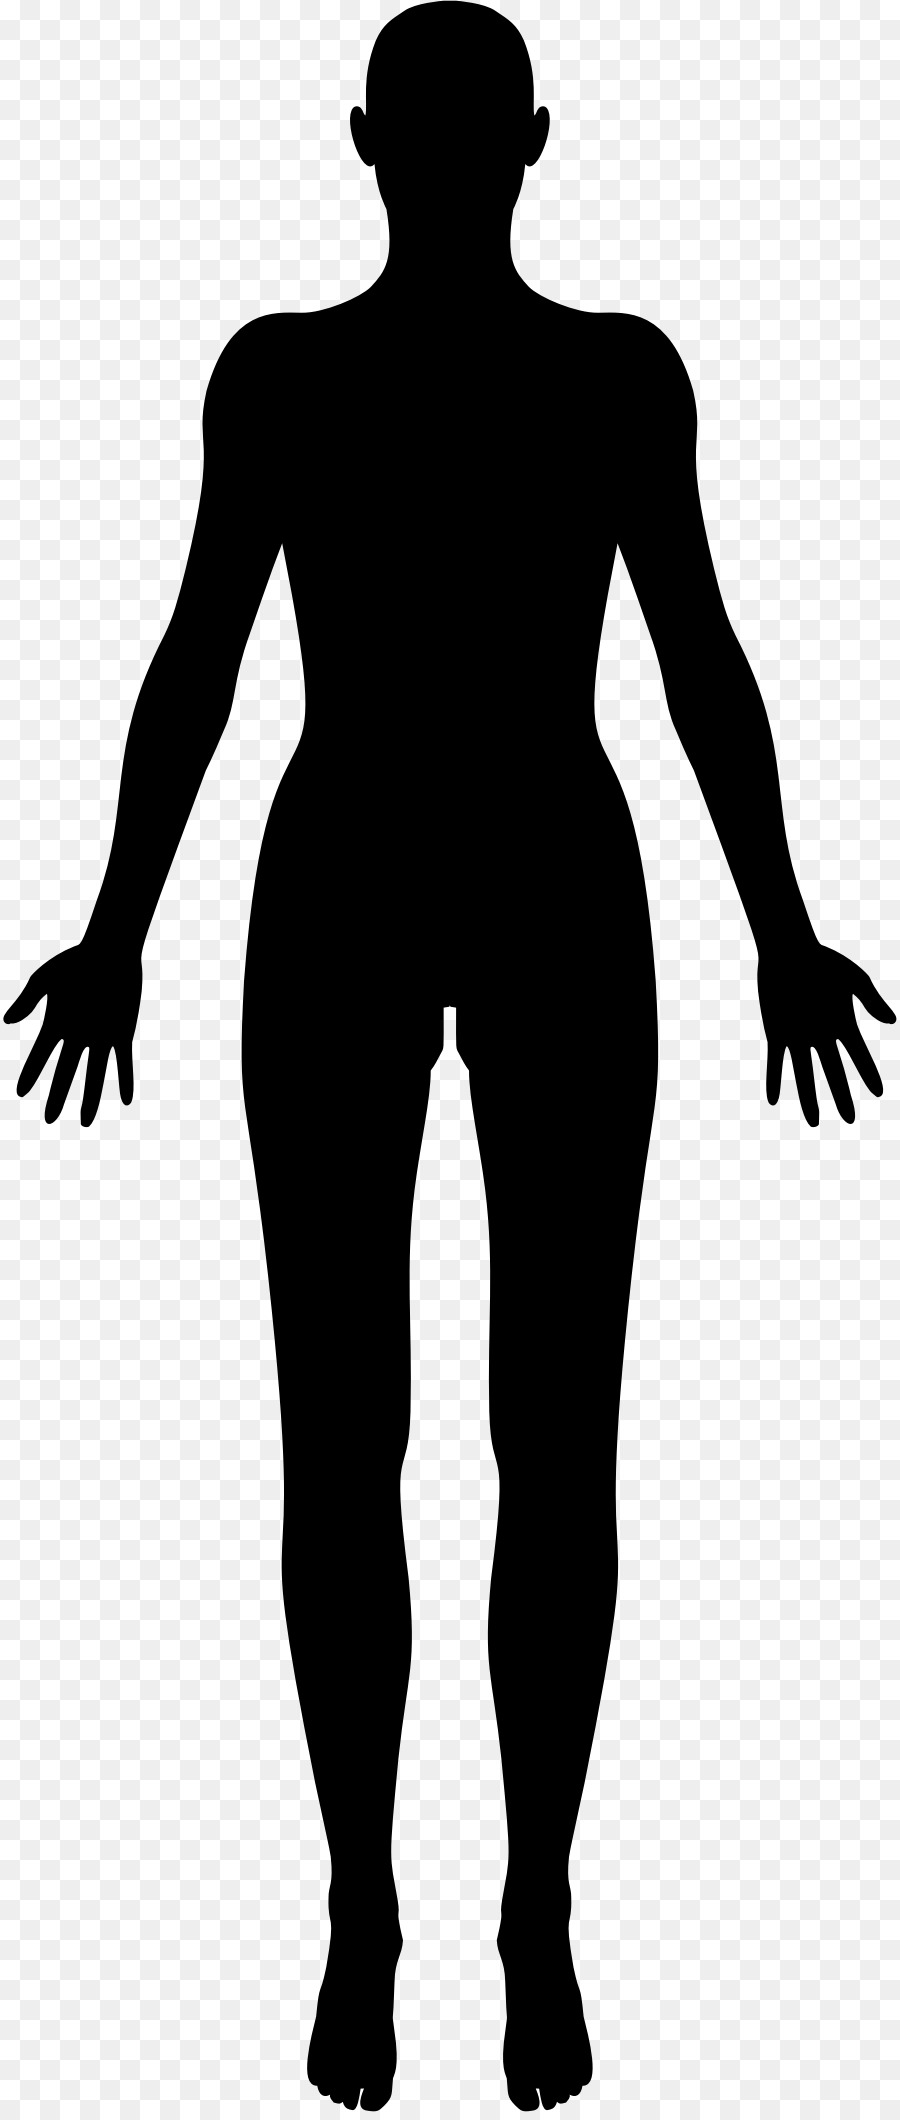 Female Body Shape Human Body Silhouette Clip Art Female Png Download 894 2112 Free Transparent Png Download Clip Art Library Cat silhouette sitting on white, black isolated cat. clipart library